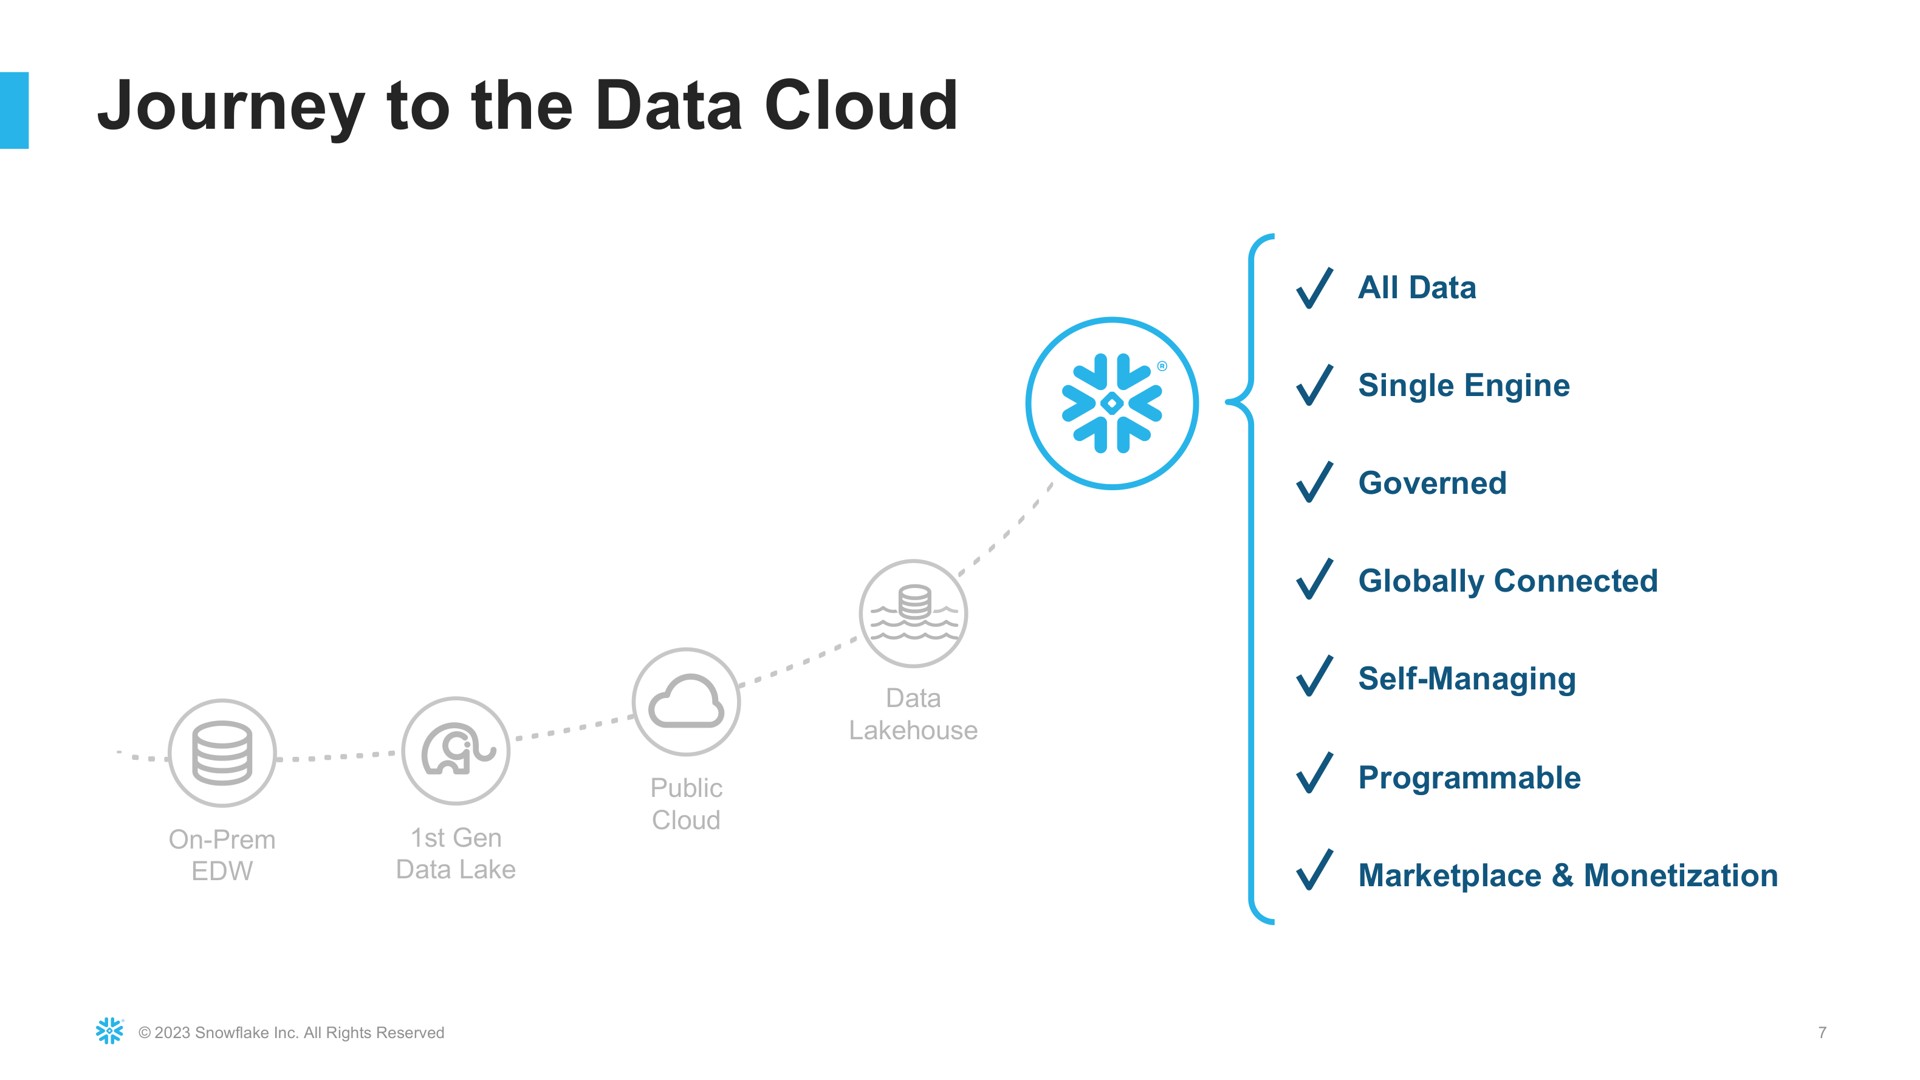 journey to the data cloud | Snowflake